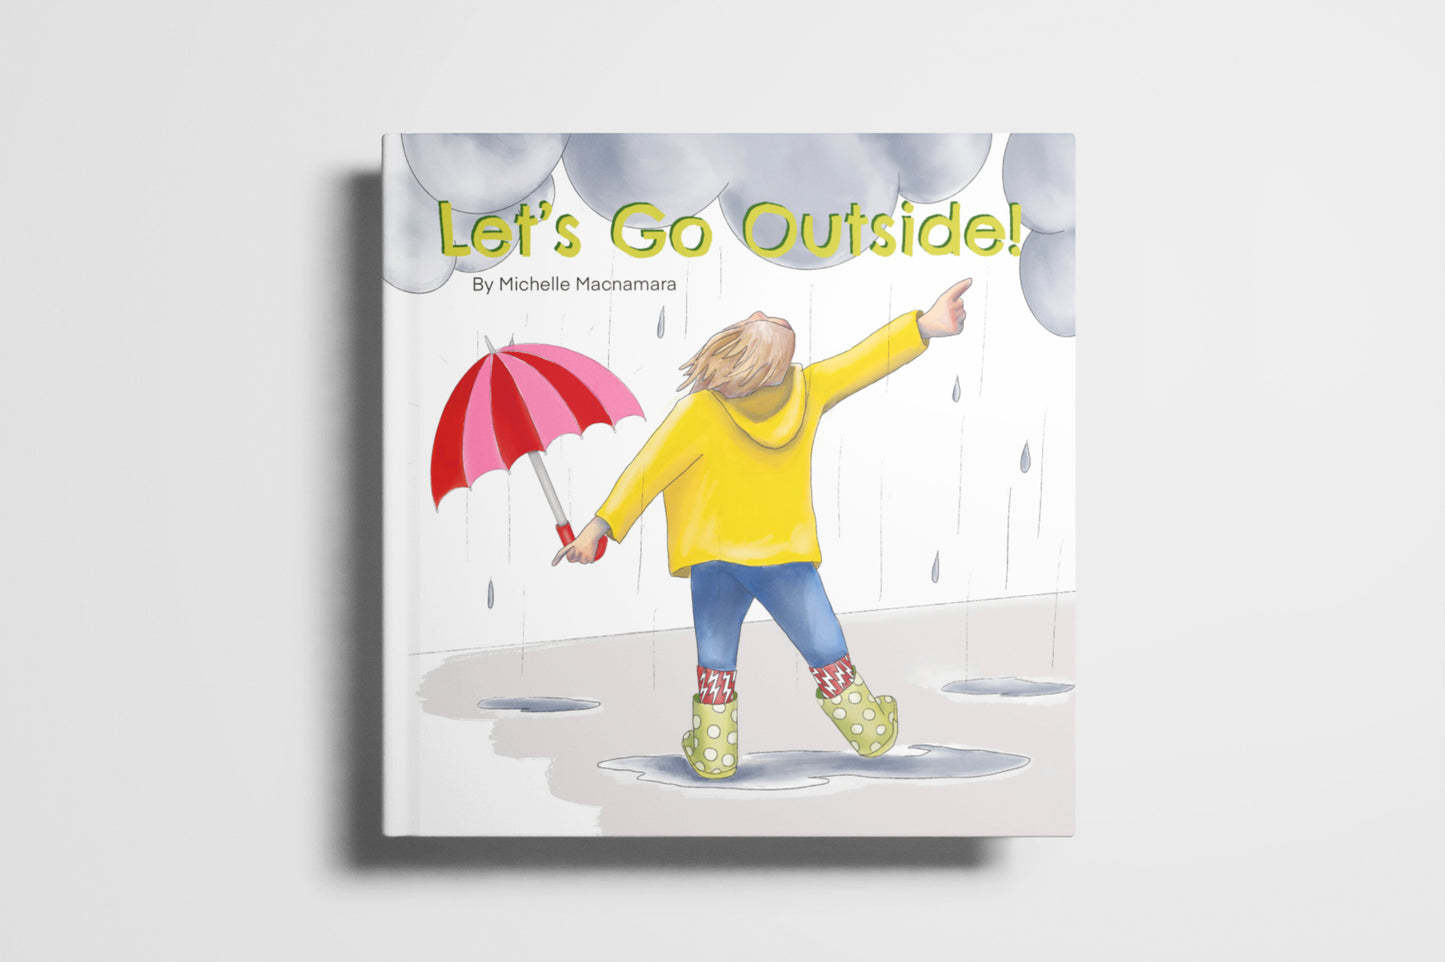 Let’s Go Outside! Hardcover book by Michelle Macnamara. A story about a rainy day for kids